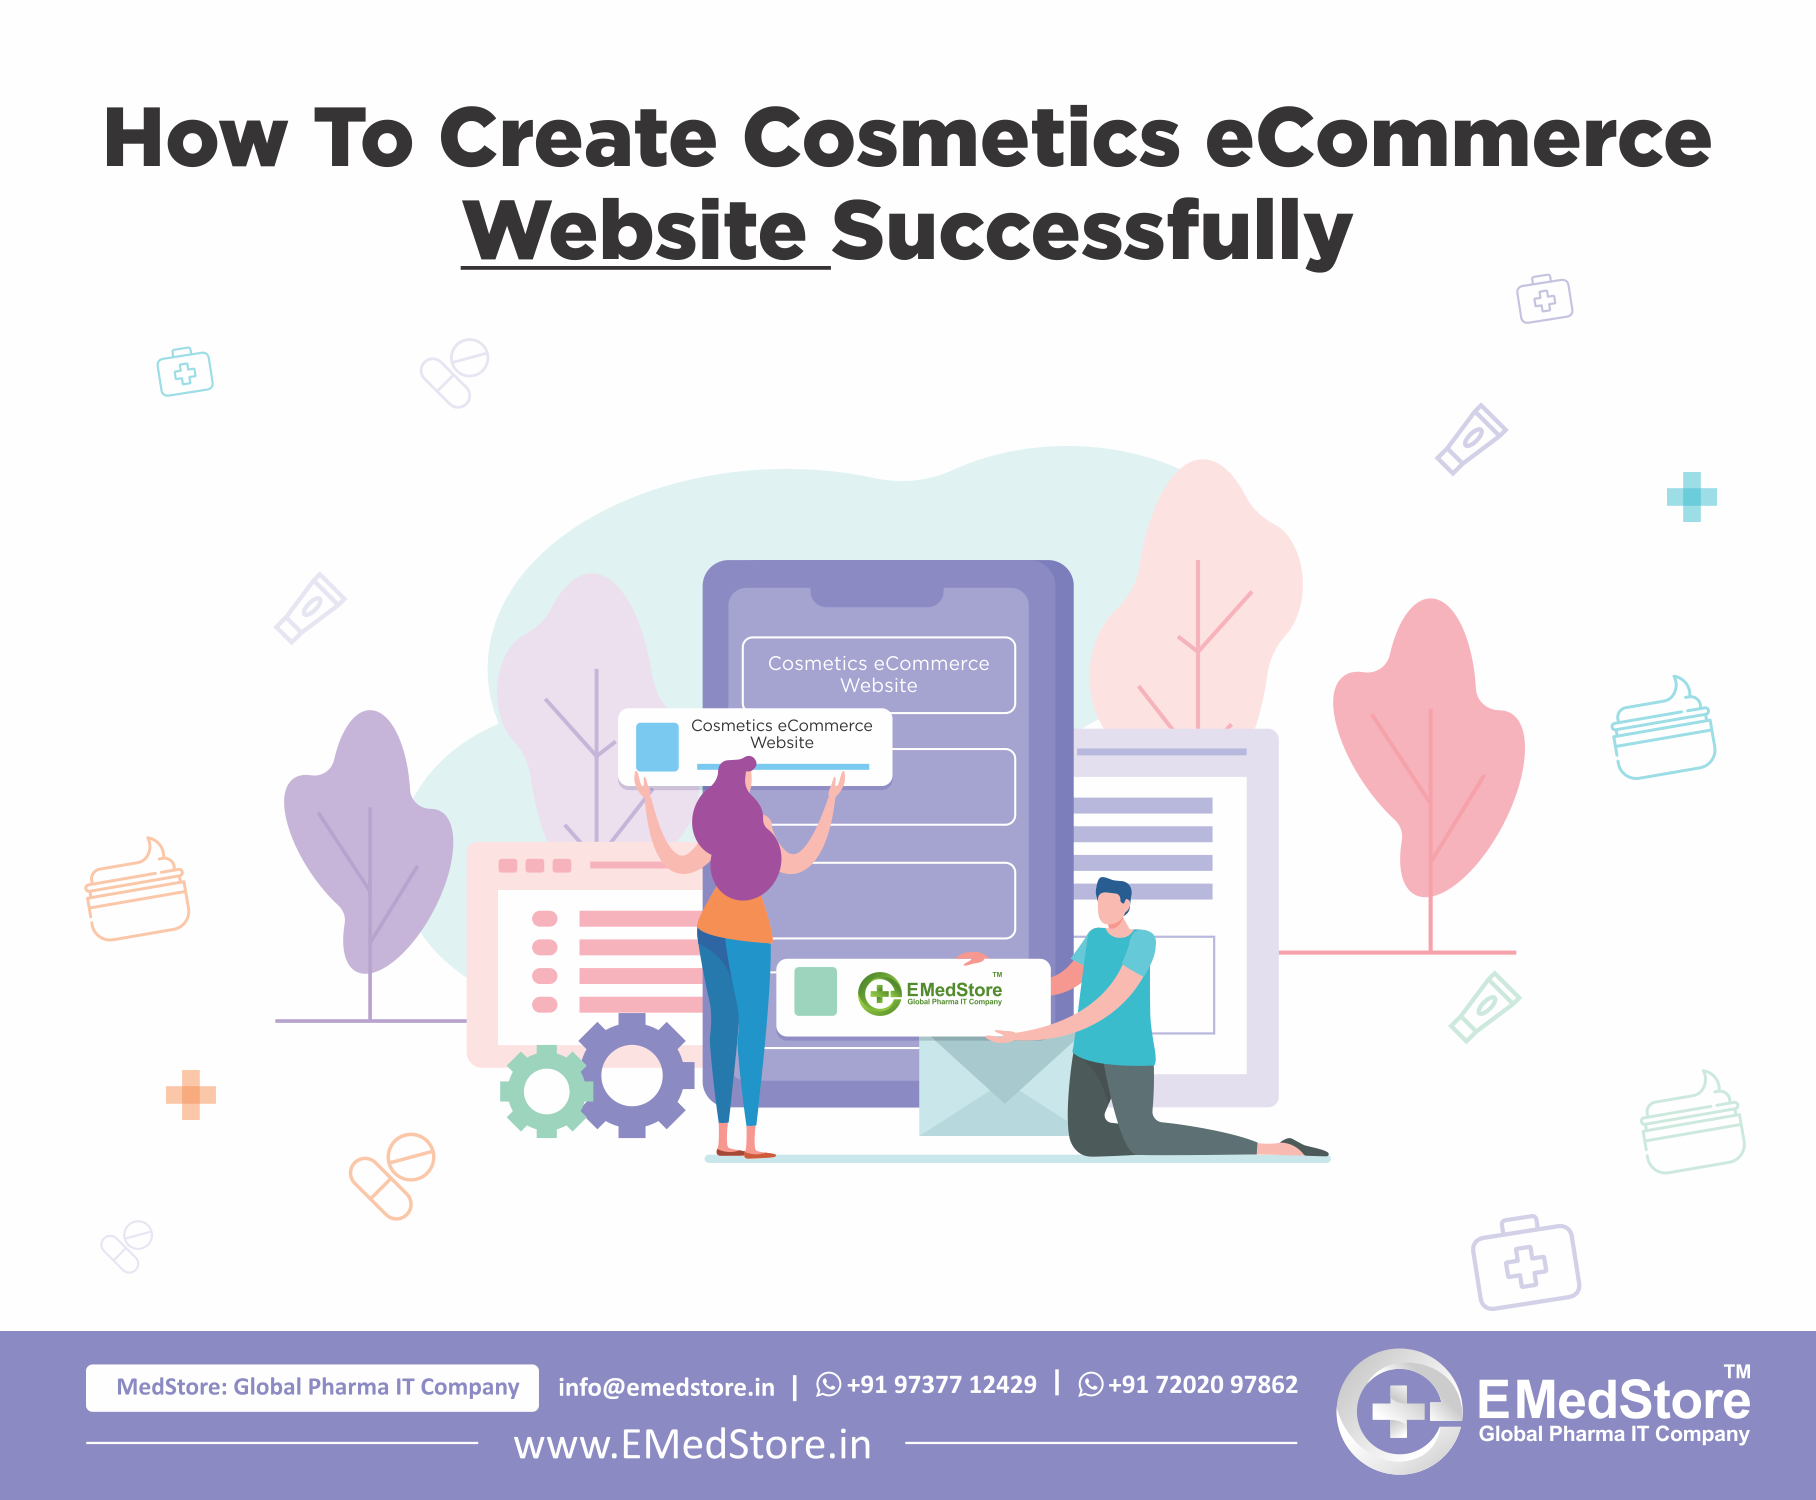 How To Create Cosmetics eCommerce Website Successfully